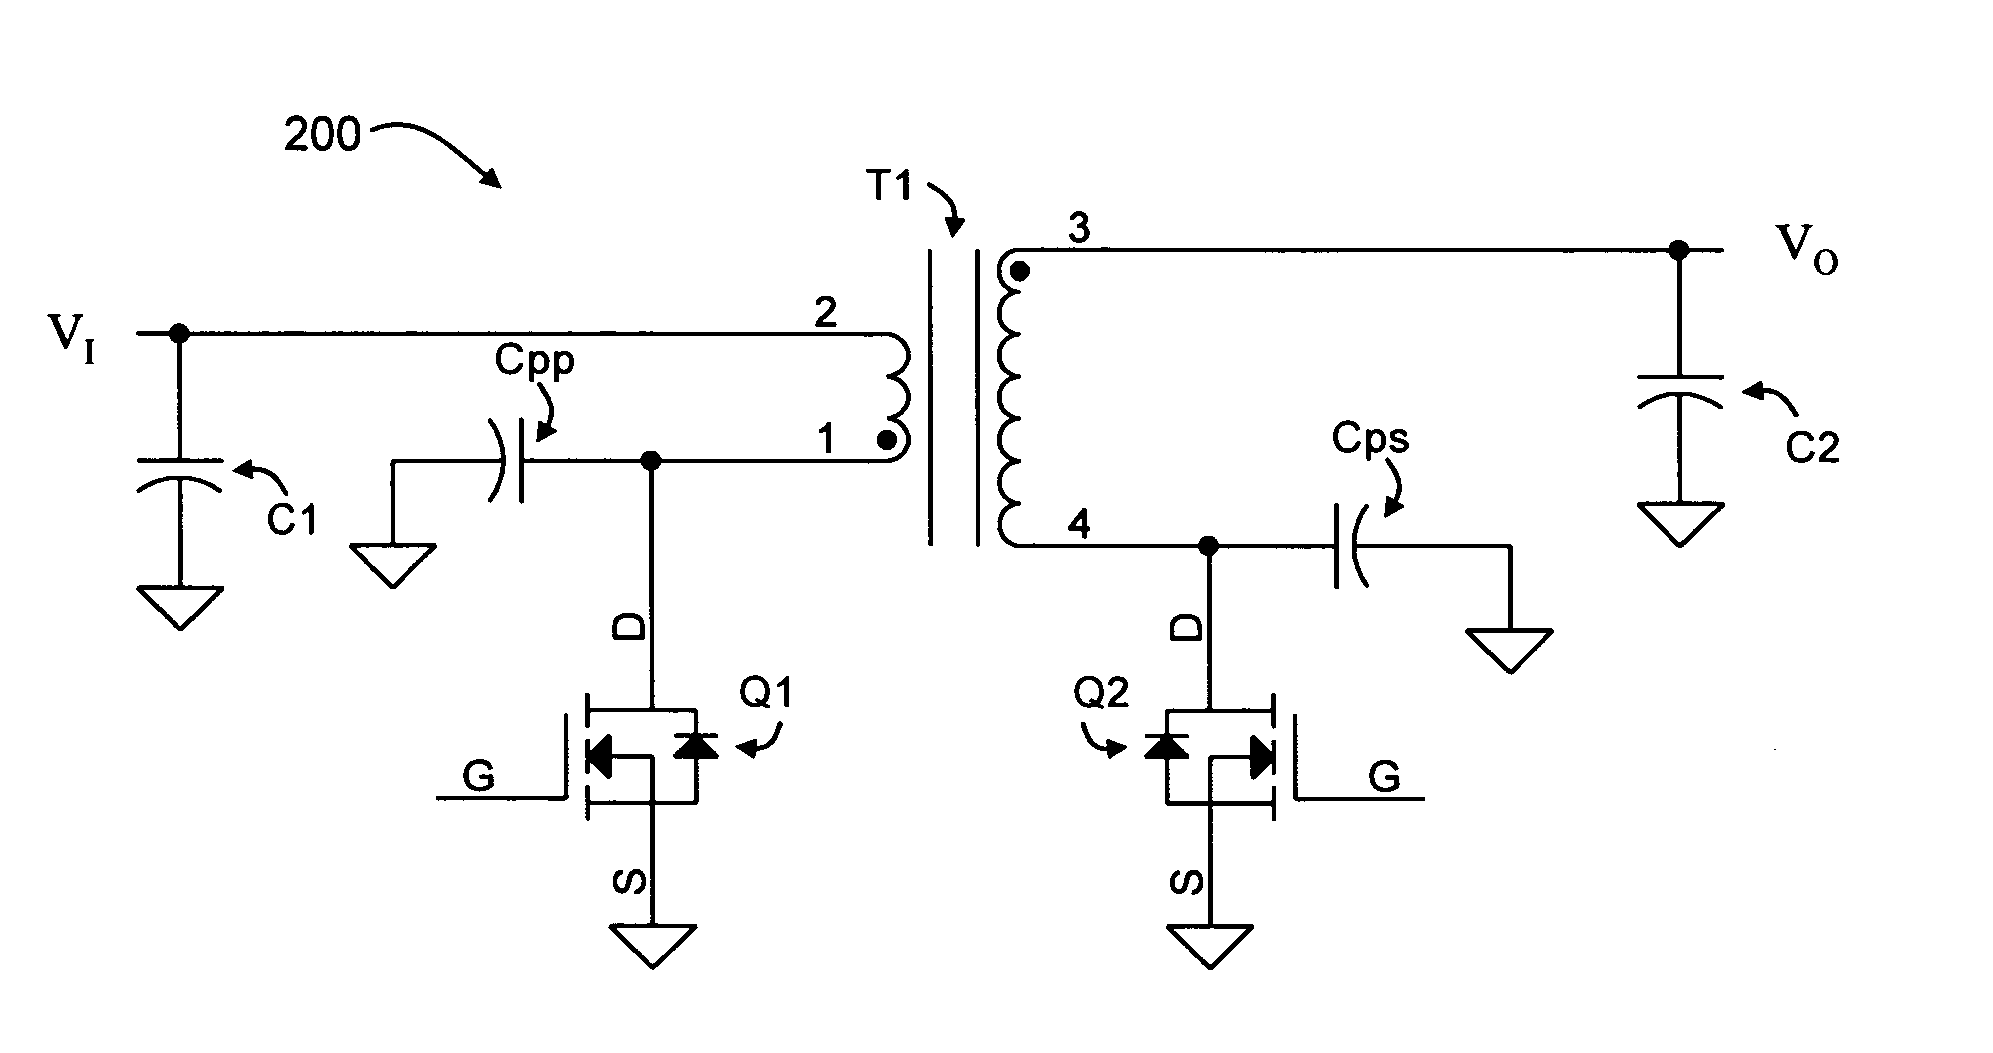 Power circuitry for high-frequency applications